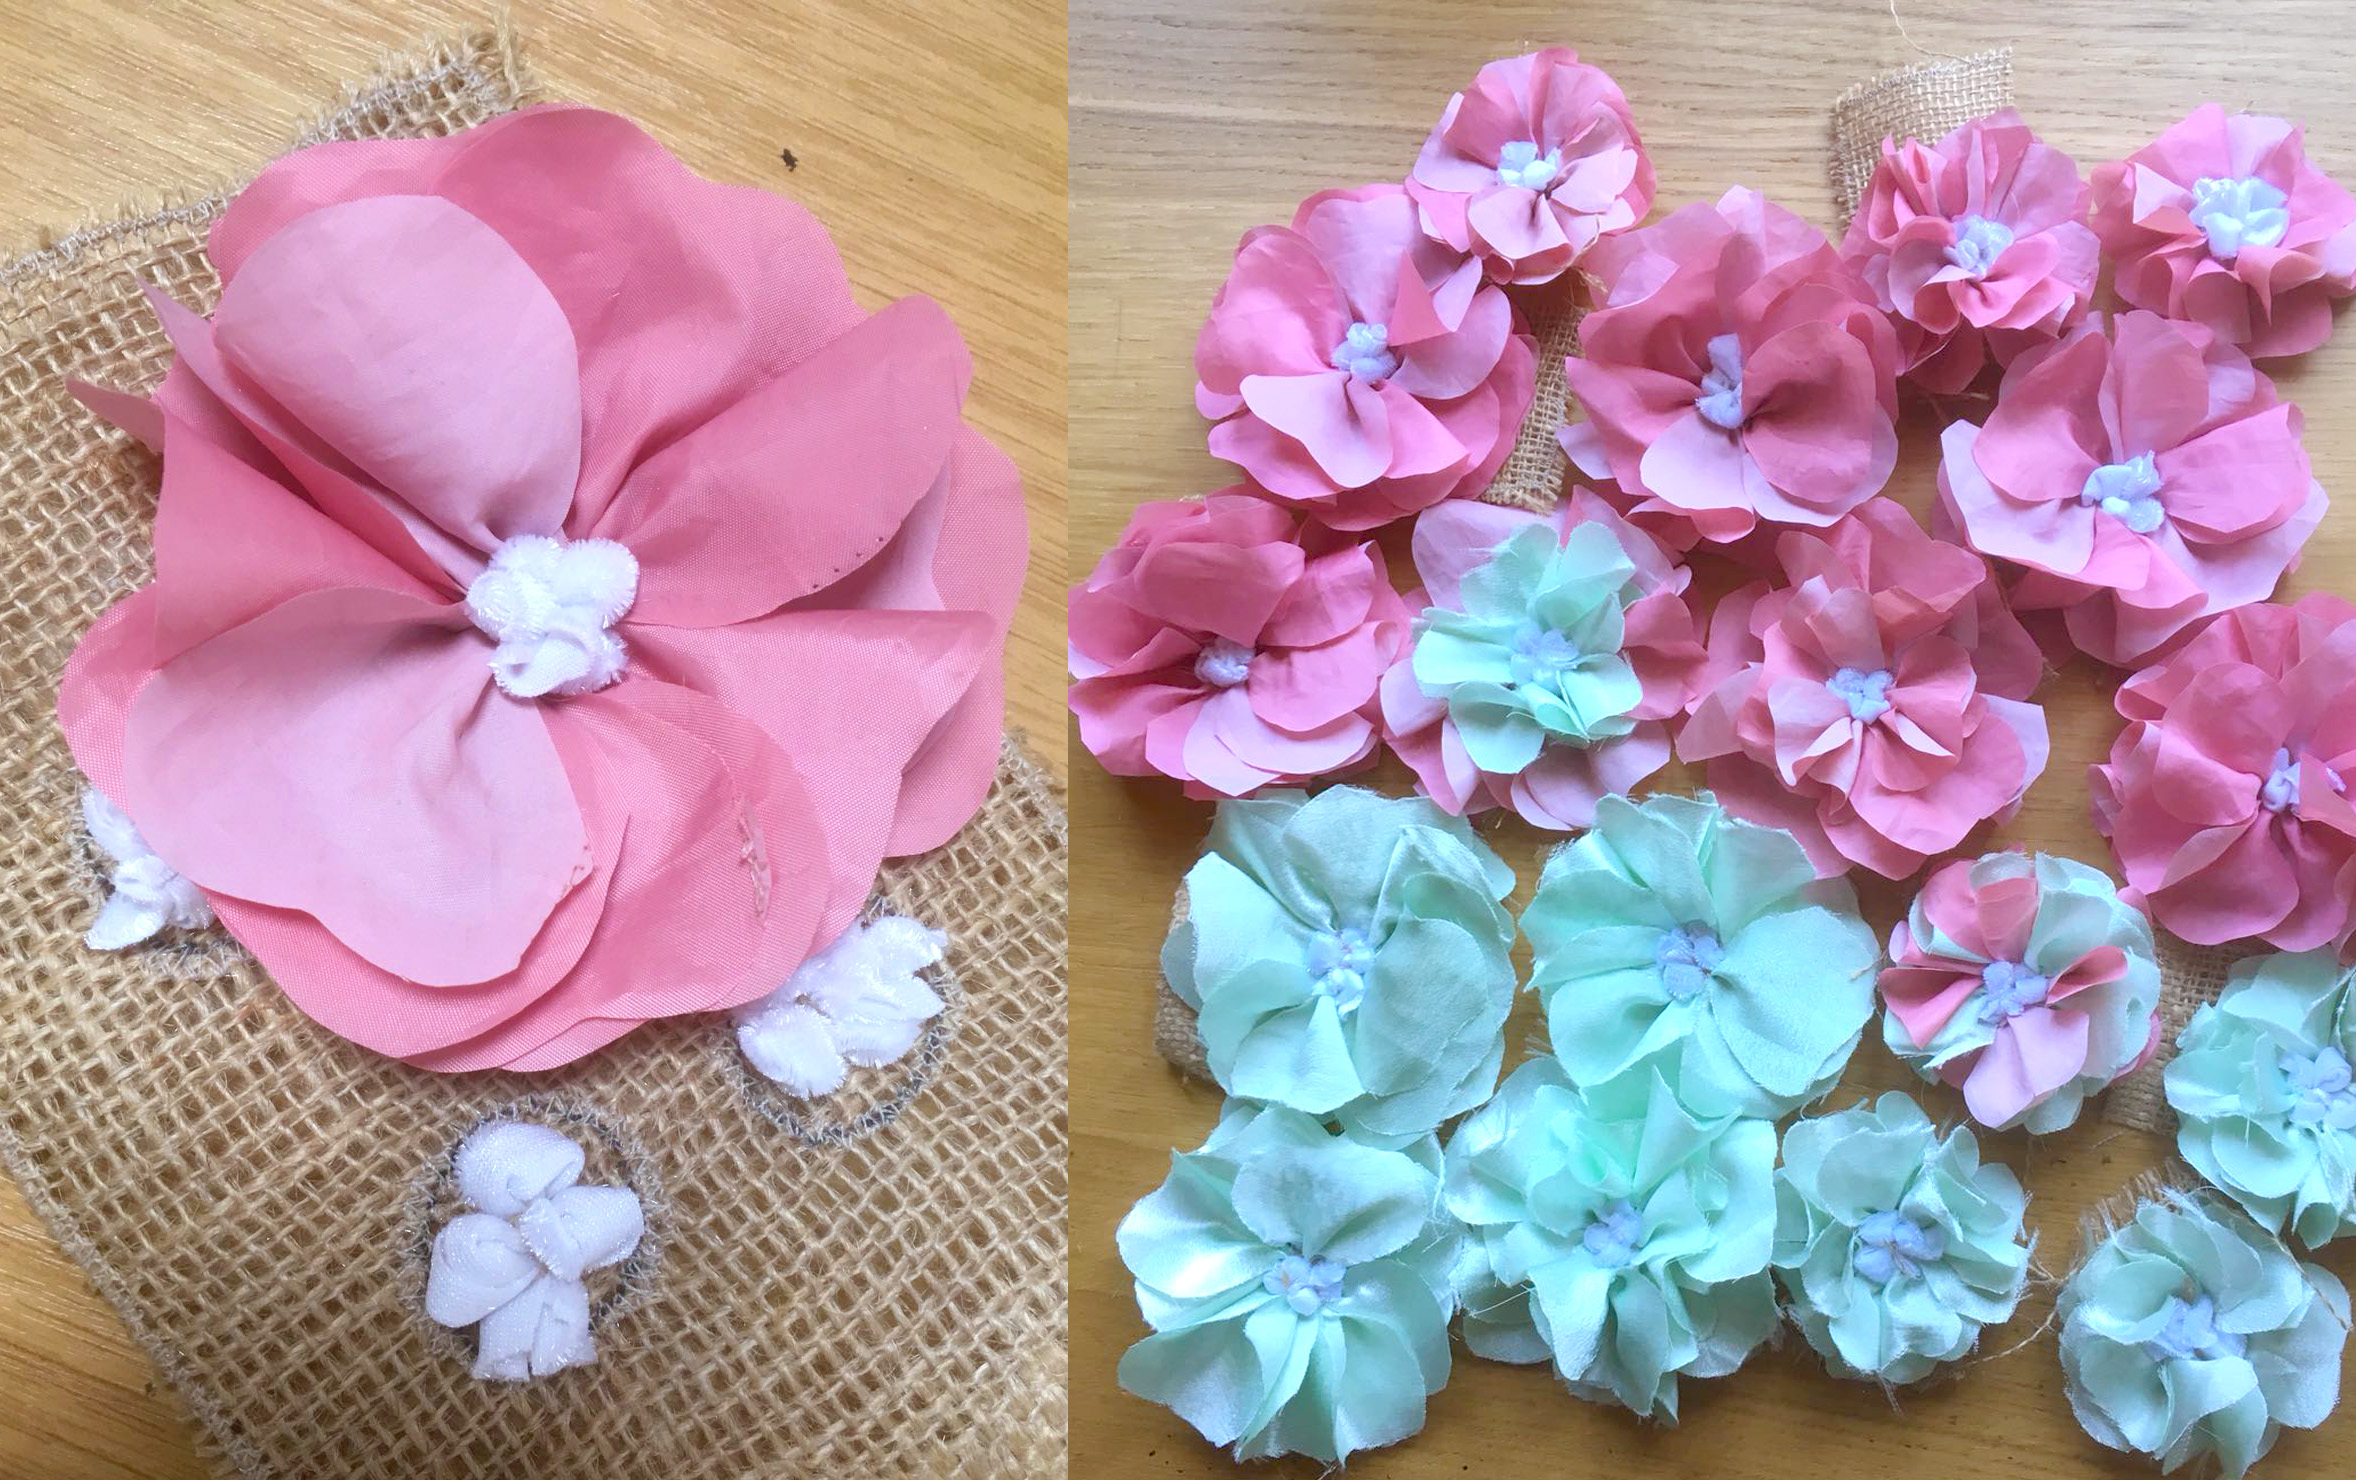 Rag Rug Shaped Flowers in pink and blue on hessian with loopy and shaggy rag rugging